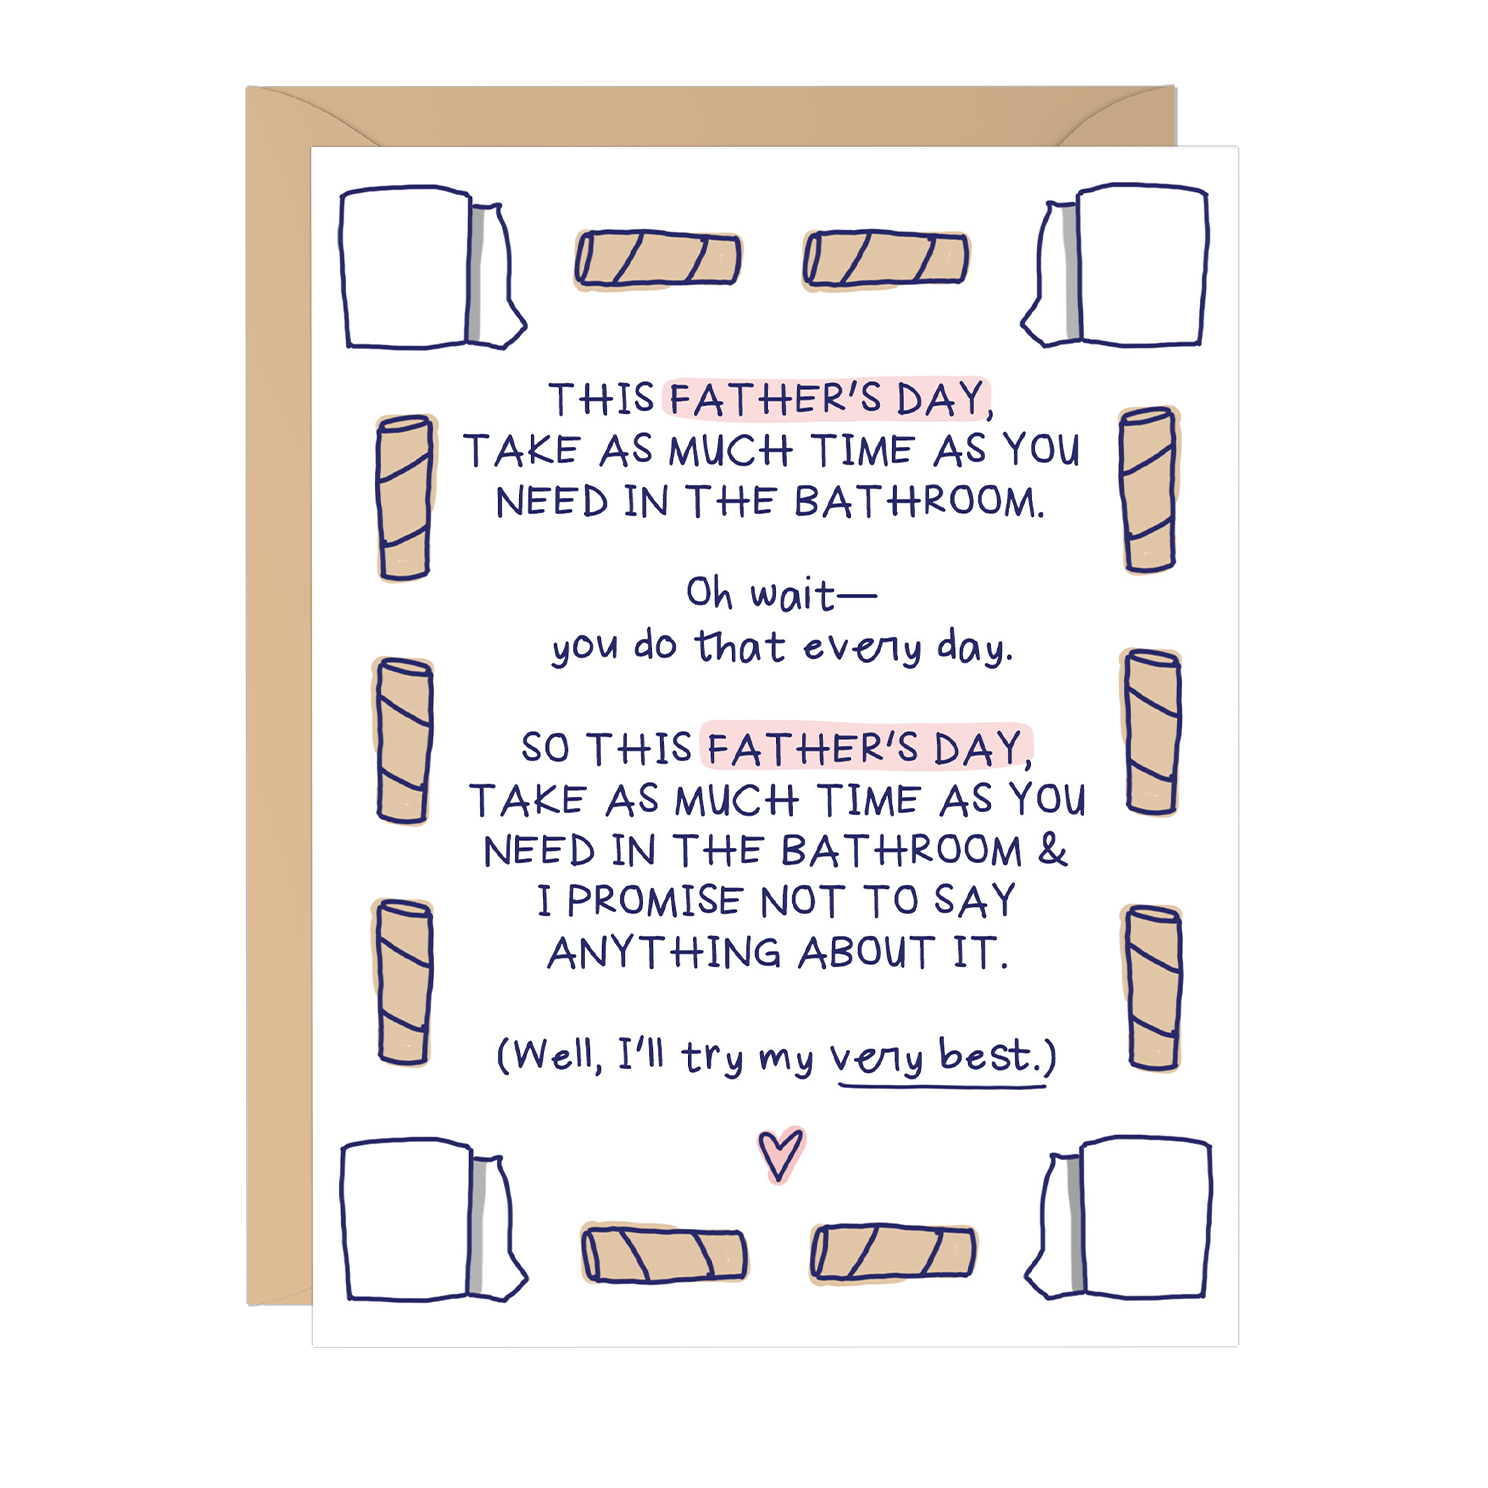 This Father's Day Take As Much Bathroom Time As You Need -  Father's Day Card